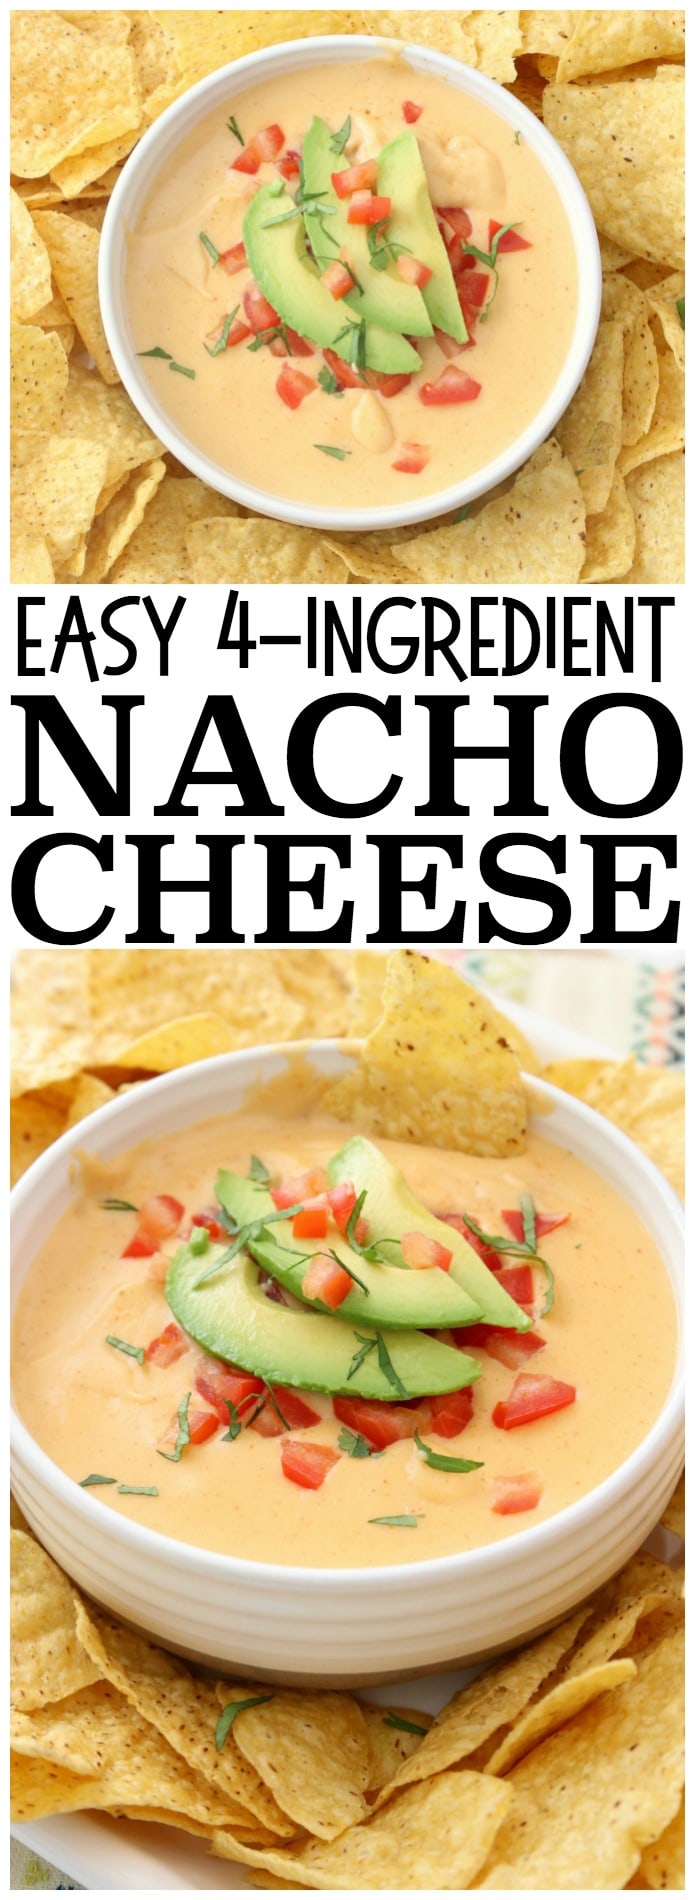 Easy Nacho Cheese sauce recipe with only 4 ingredients and is made in minutes! Smooth, creamy with great nacho cheese flavor, this recipe is perfect for parties, busy weeknight dinners and game day food! Best #Nacho #Cheese #recipe ever from Butter With A Side of Bread #appetizer #food #nachos #homemade